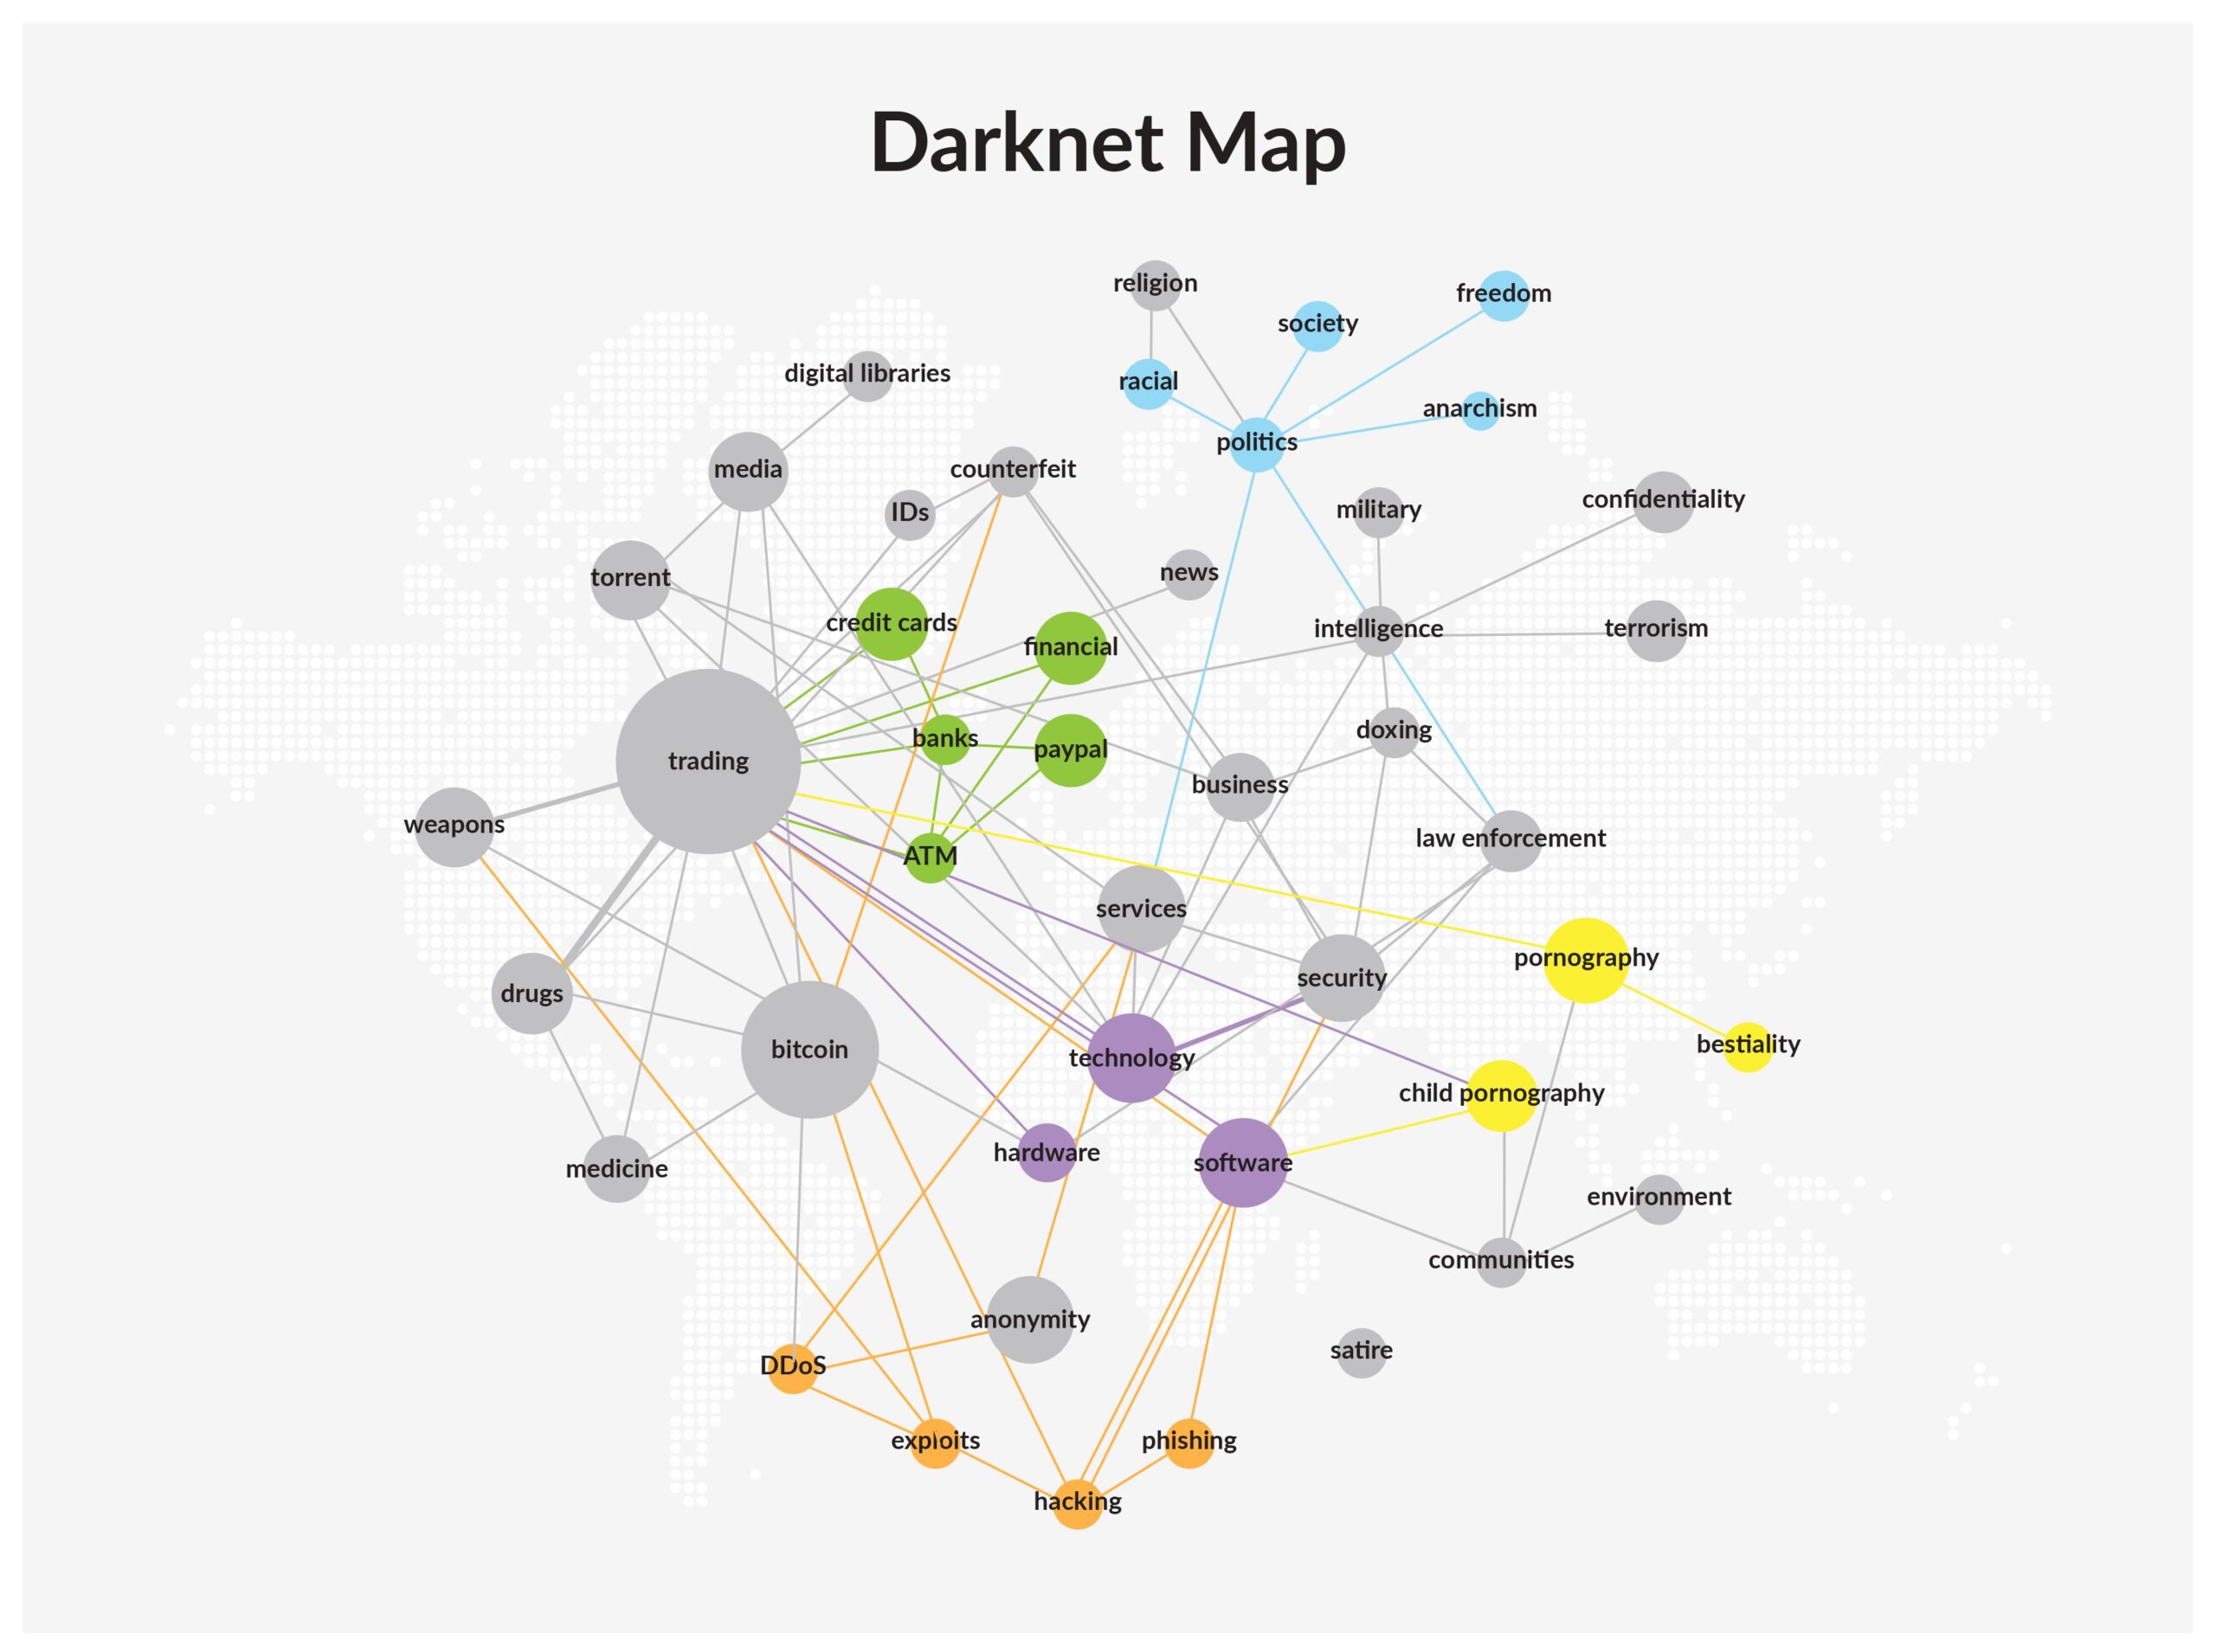 The Flare Research team mapped out the content on the dark web and their connections to each other. Each topic is represented by a circle.